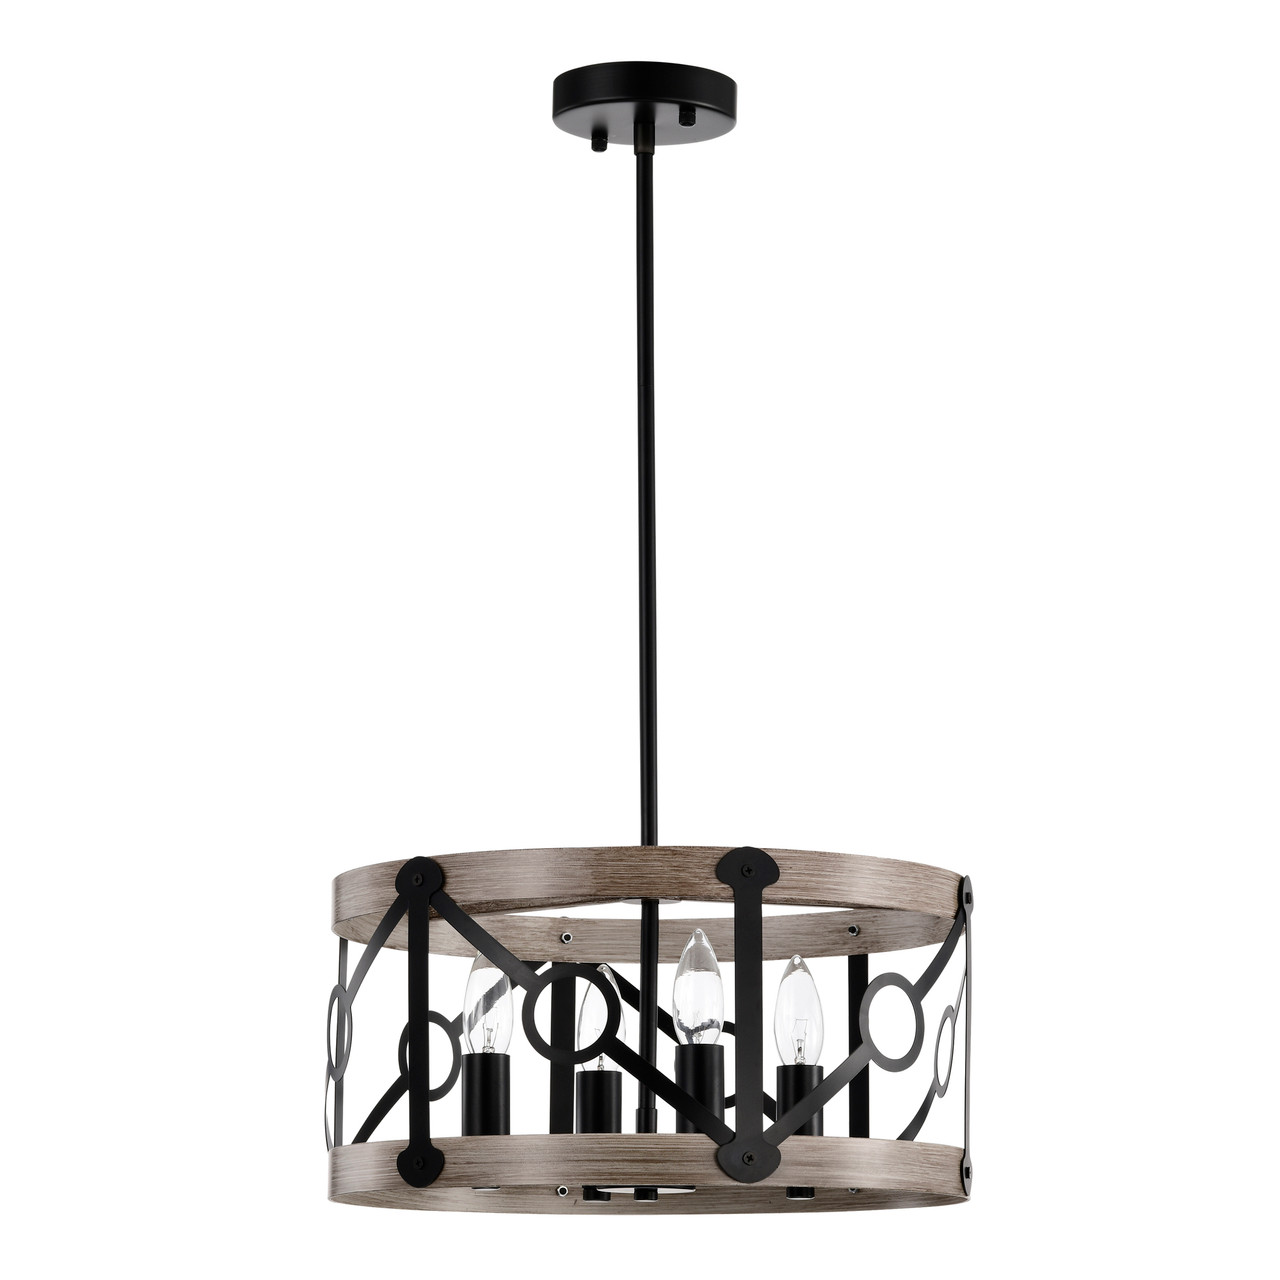 WAREHOUSE OF TIFFANY'S GD01-09MW Copas 16 in. 4-Light Indoor Matte Black and Faux Wood Grain Finish Chandelier with Light Kit